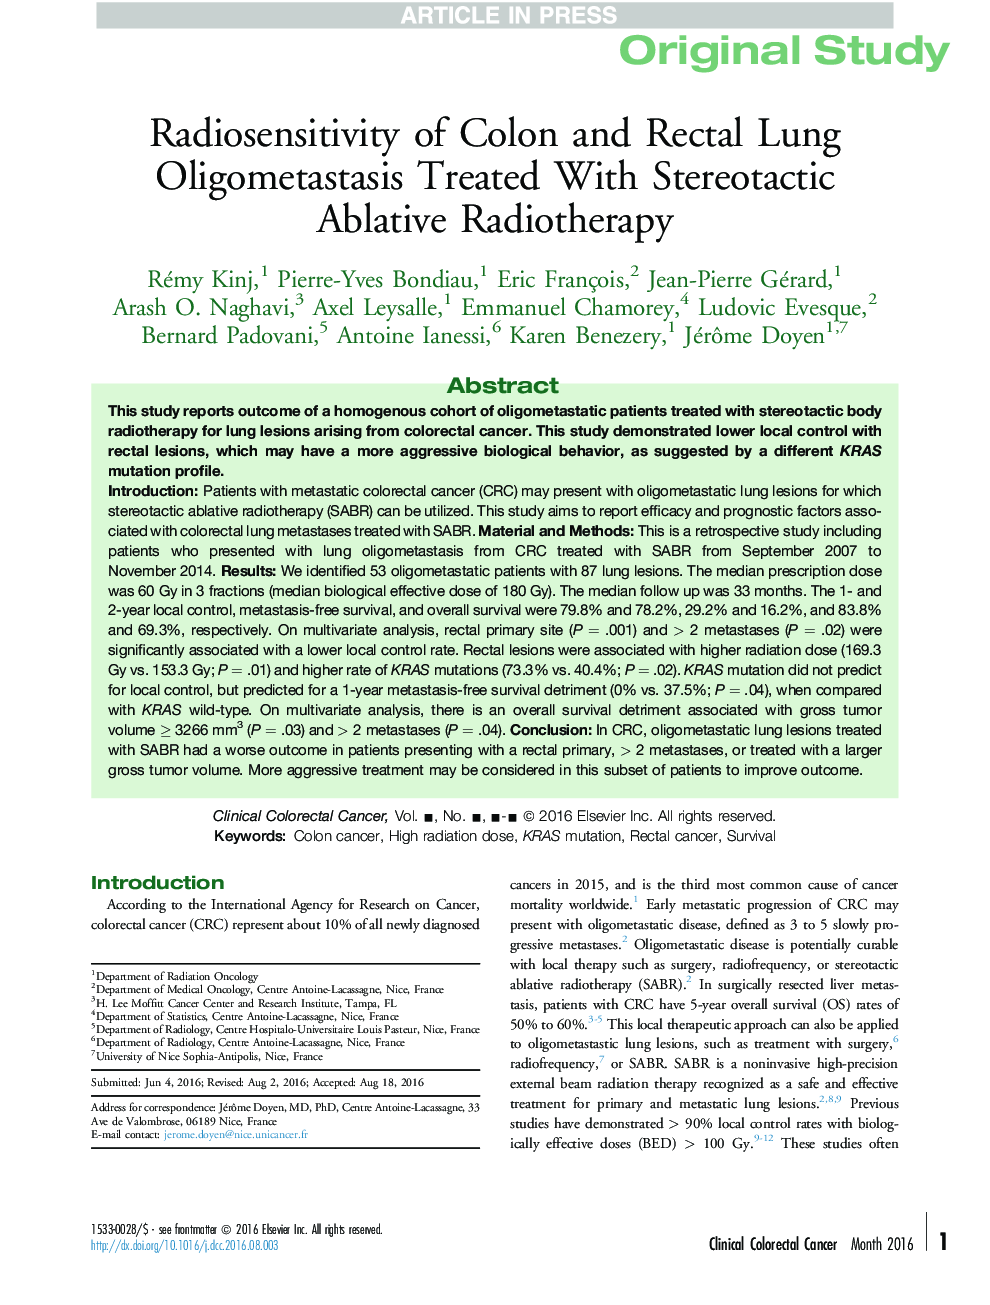 Radiosensitivity of Colon and Rectal Lung Oligometastasis Treated With Stereotactic Ablative Radiotherapy